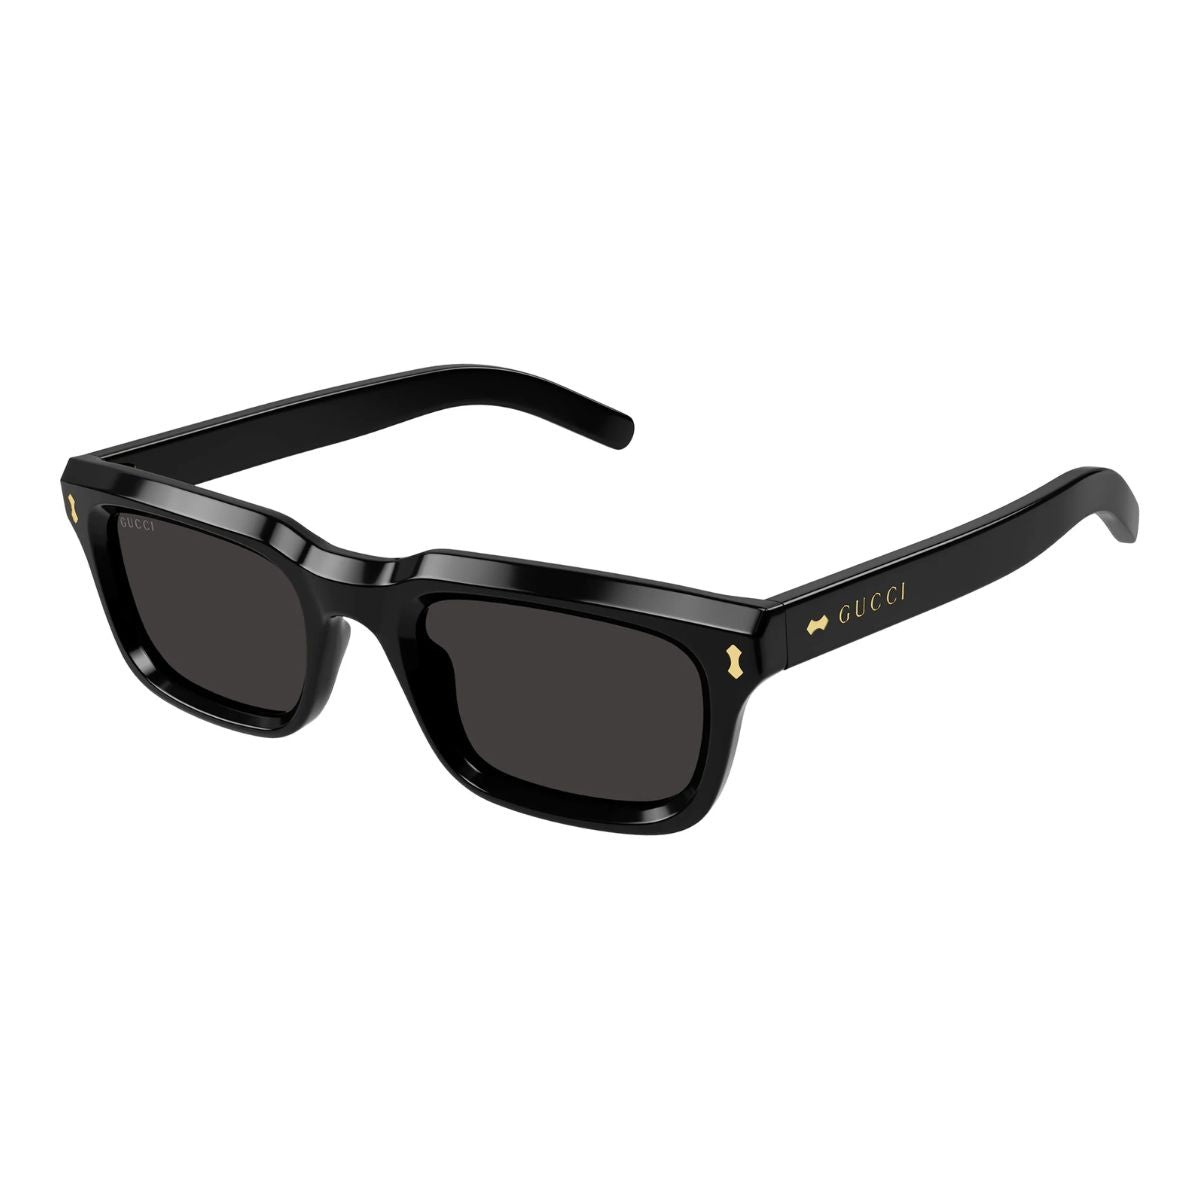 "Gucci 1524S 001 Eyewear Collection at Optorium - Elevate your eyewear with these premium frames designed for men."